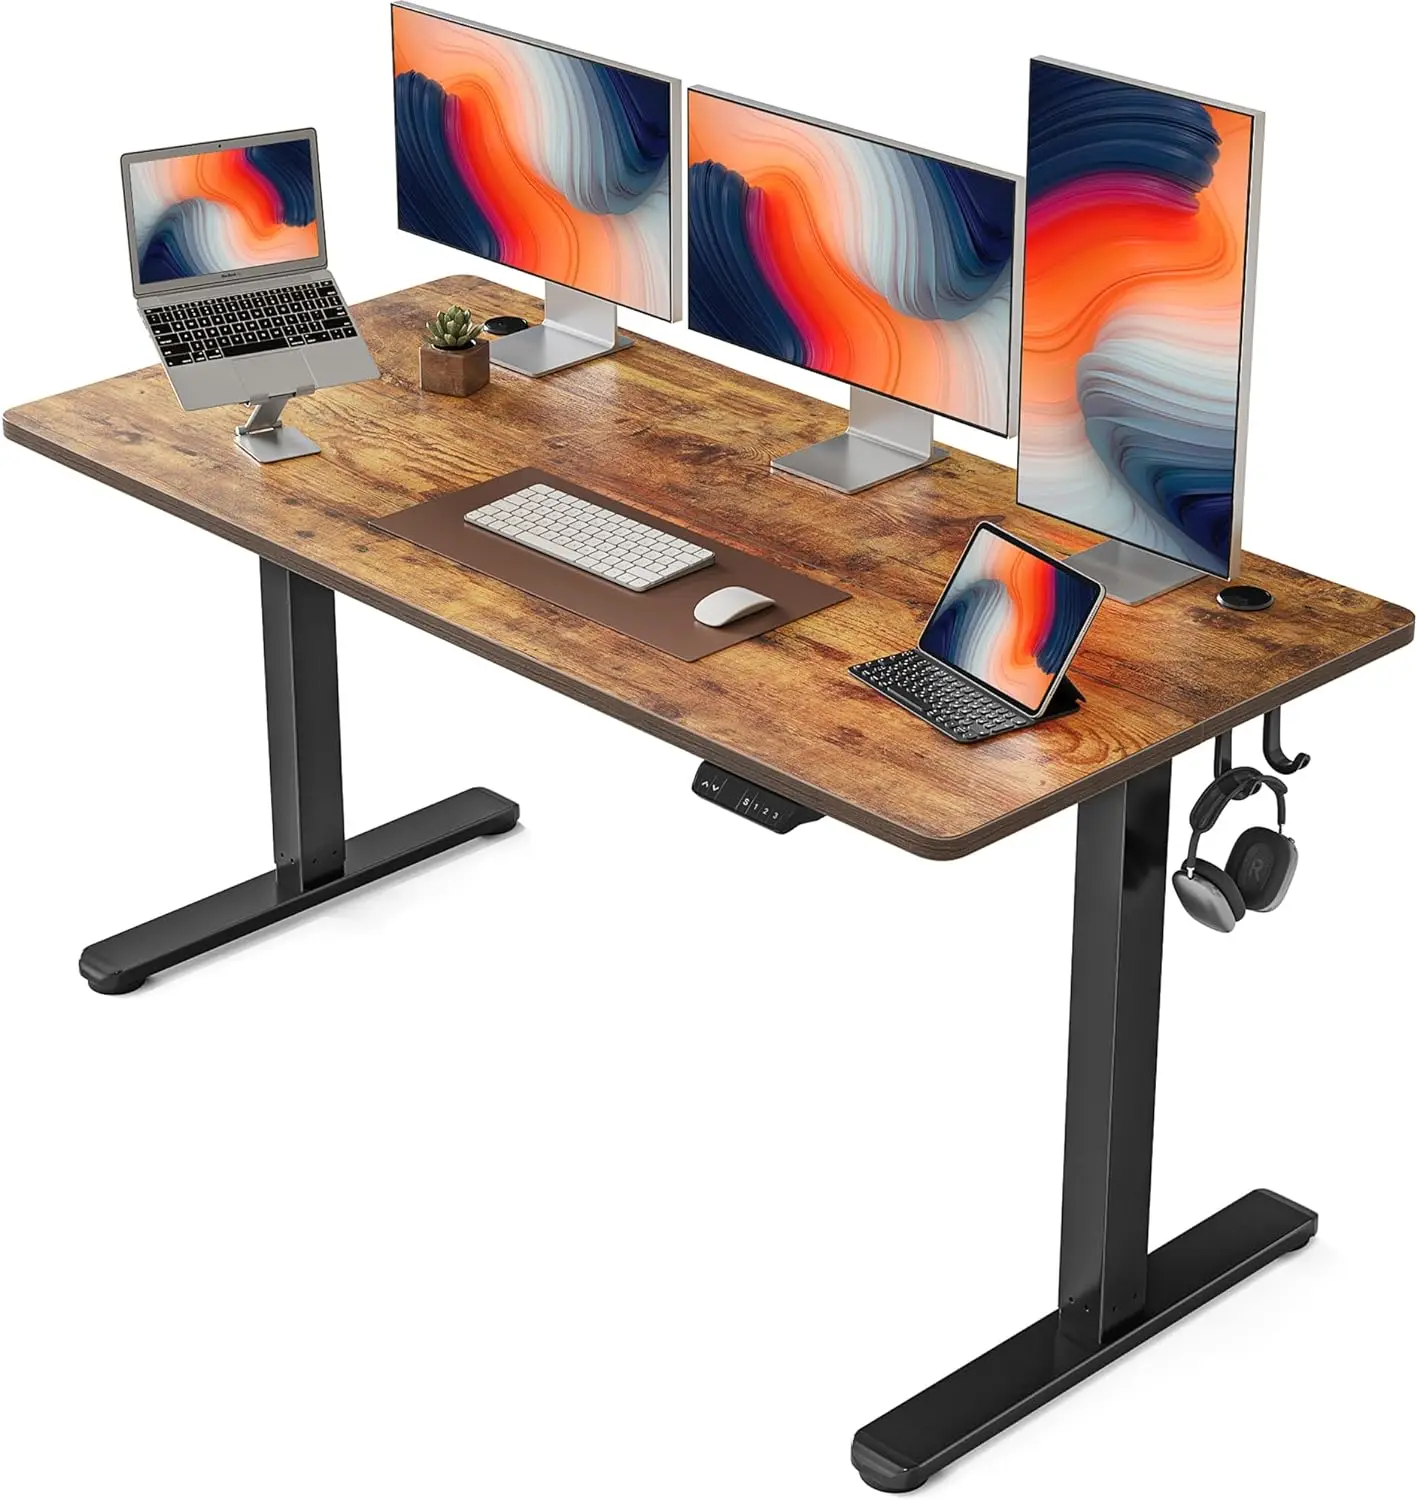 

FEZIBO Electric Standing Desk, 63 x 24 Inches Height Adjustable Stand up , Sit Stand Home Office , Computer Desk, Rustic